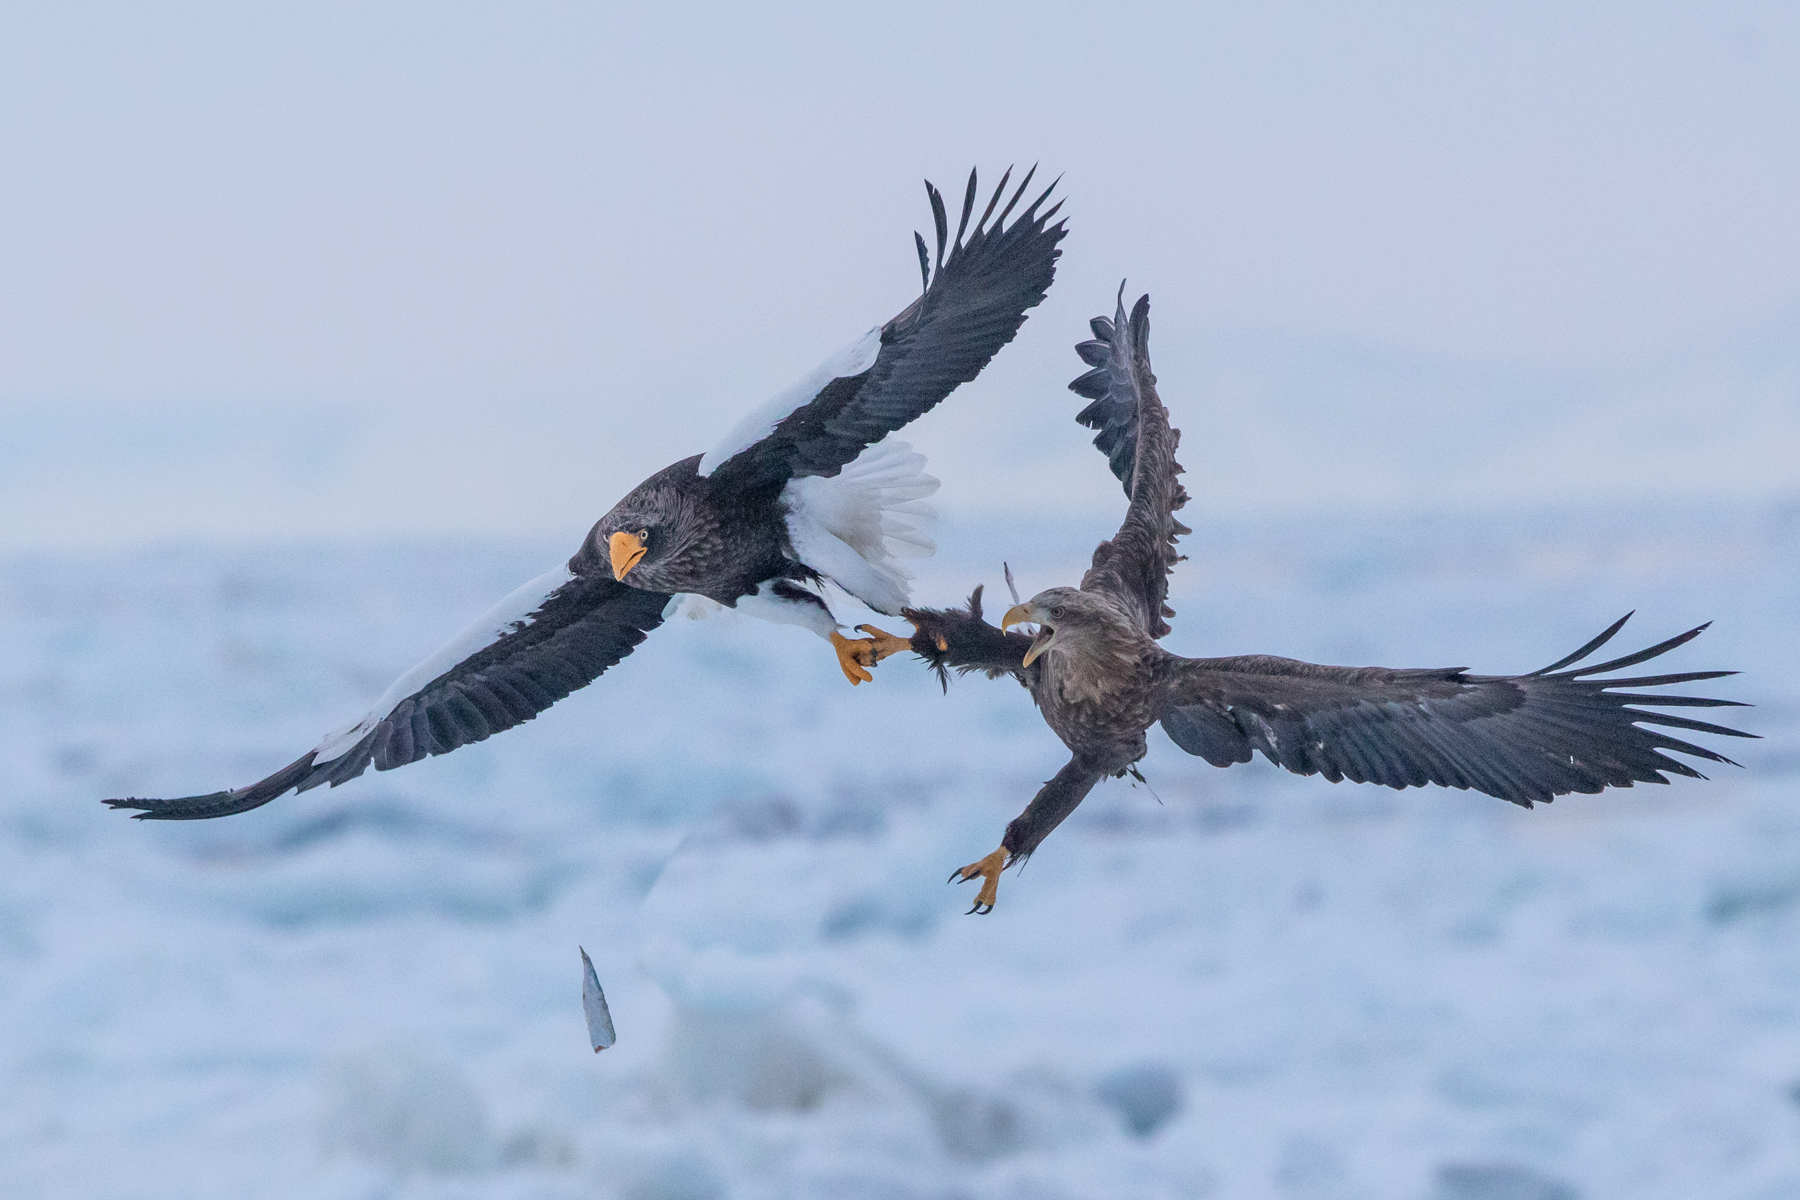 A Steller's Sea Eagle forces a White-tailed Eagle to drop a piece of fish by grabbing hold of its leg and talons! (image by Mark Beaman)